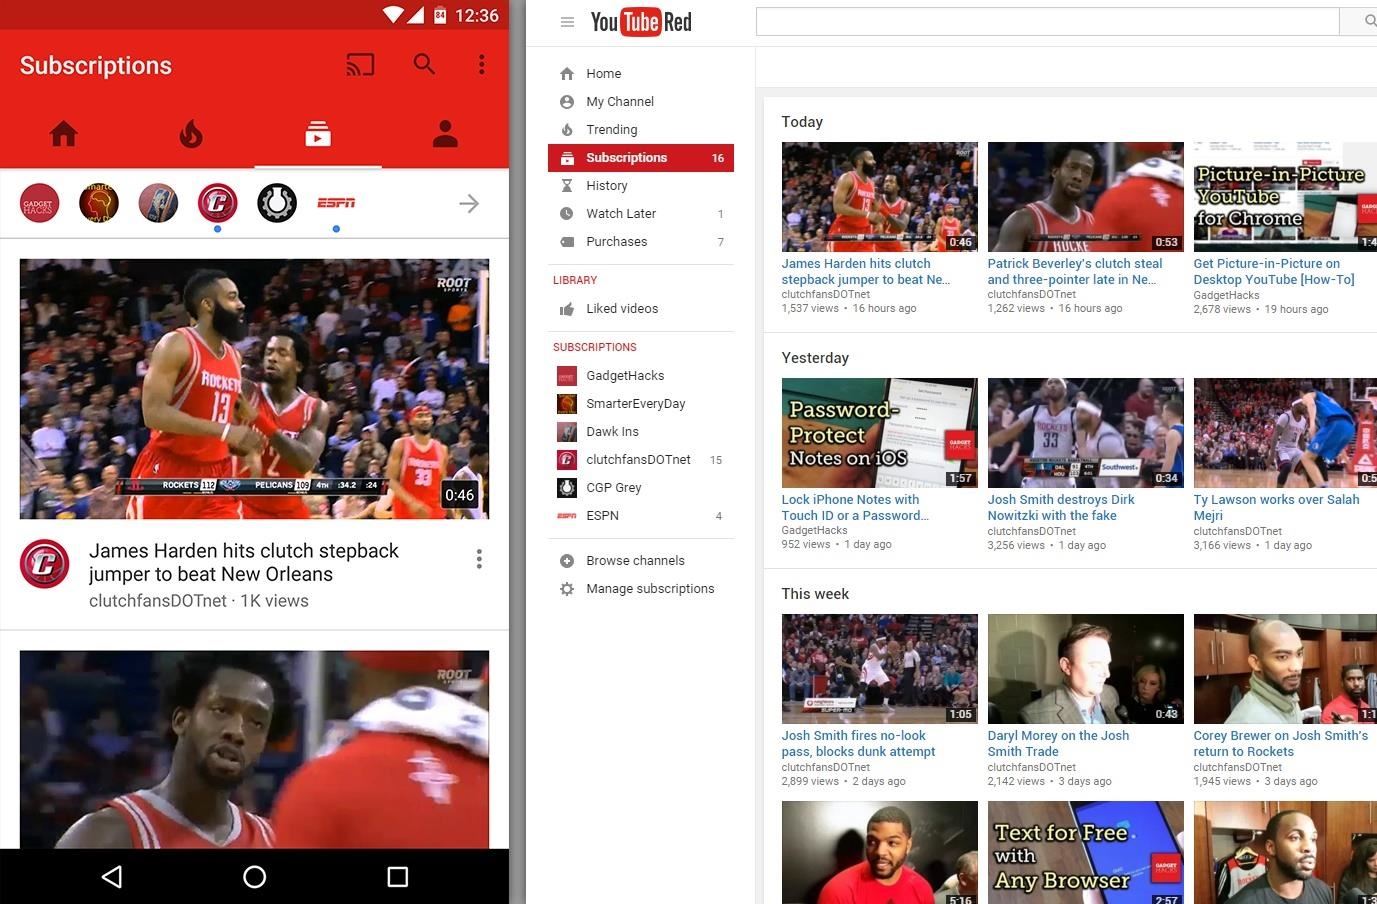 Follow These 20 YouTube Channels for the Best Videos on the Web